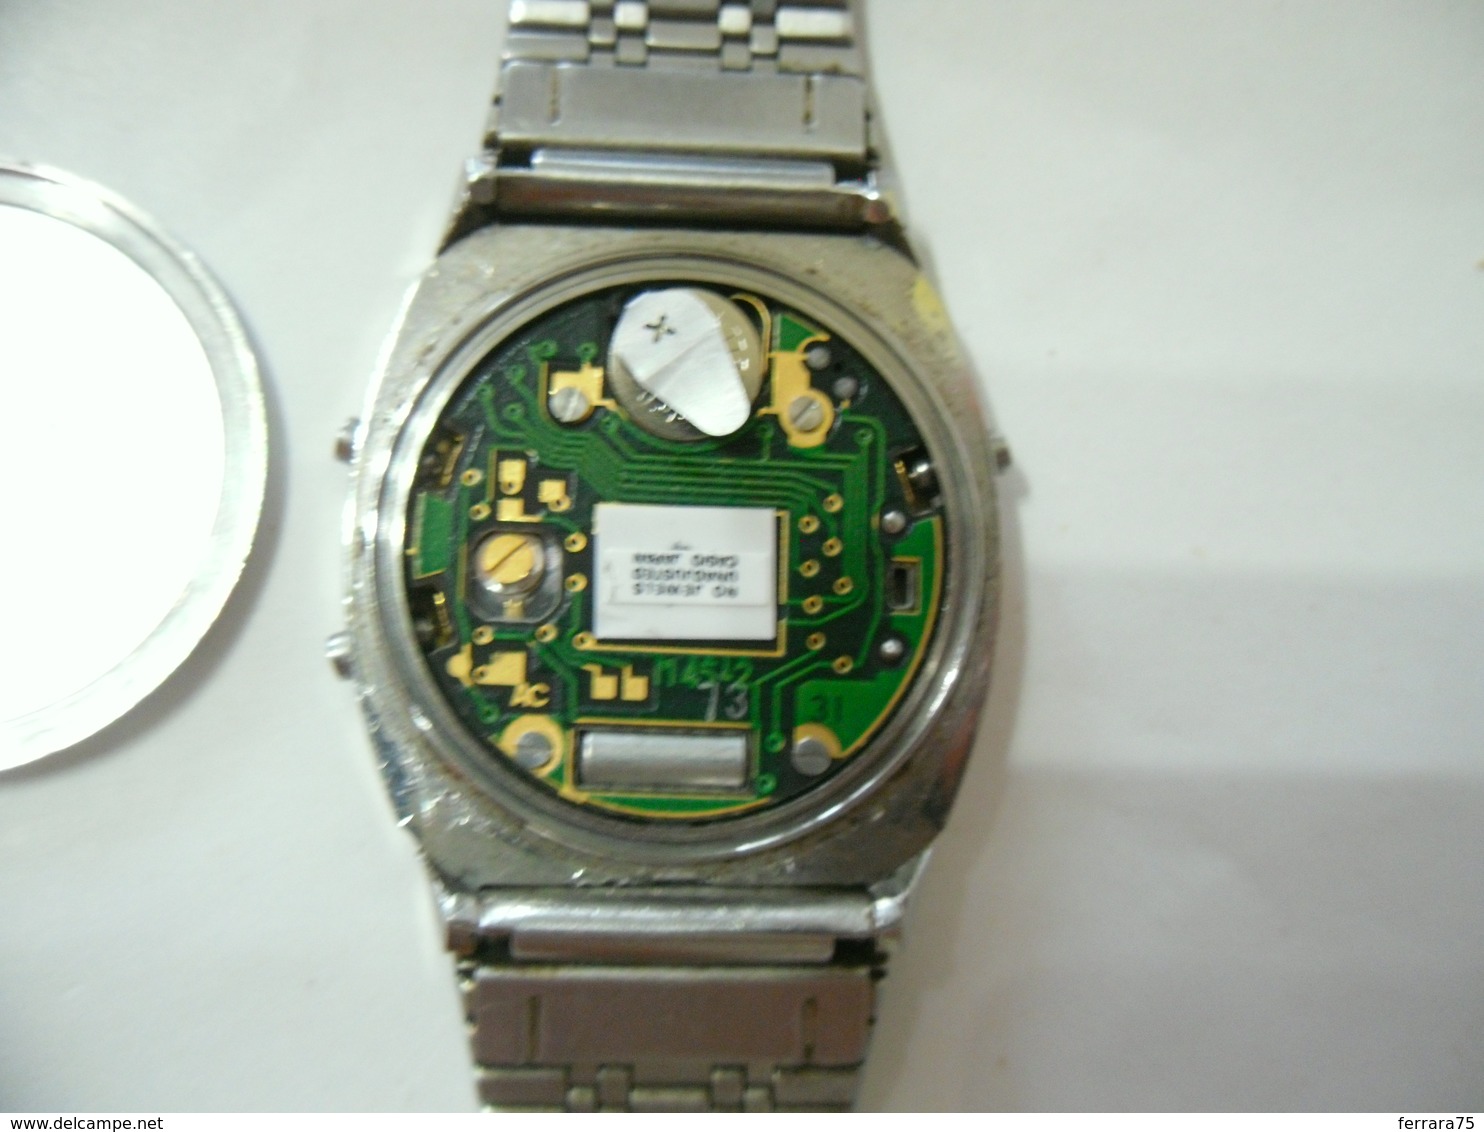 Casio Casiotron orologio vintage lcd made in japan.